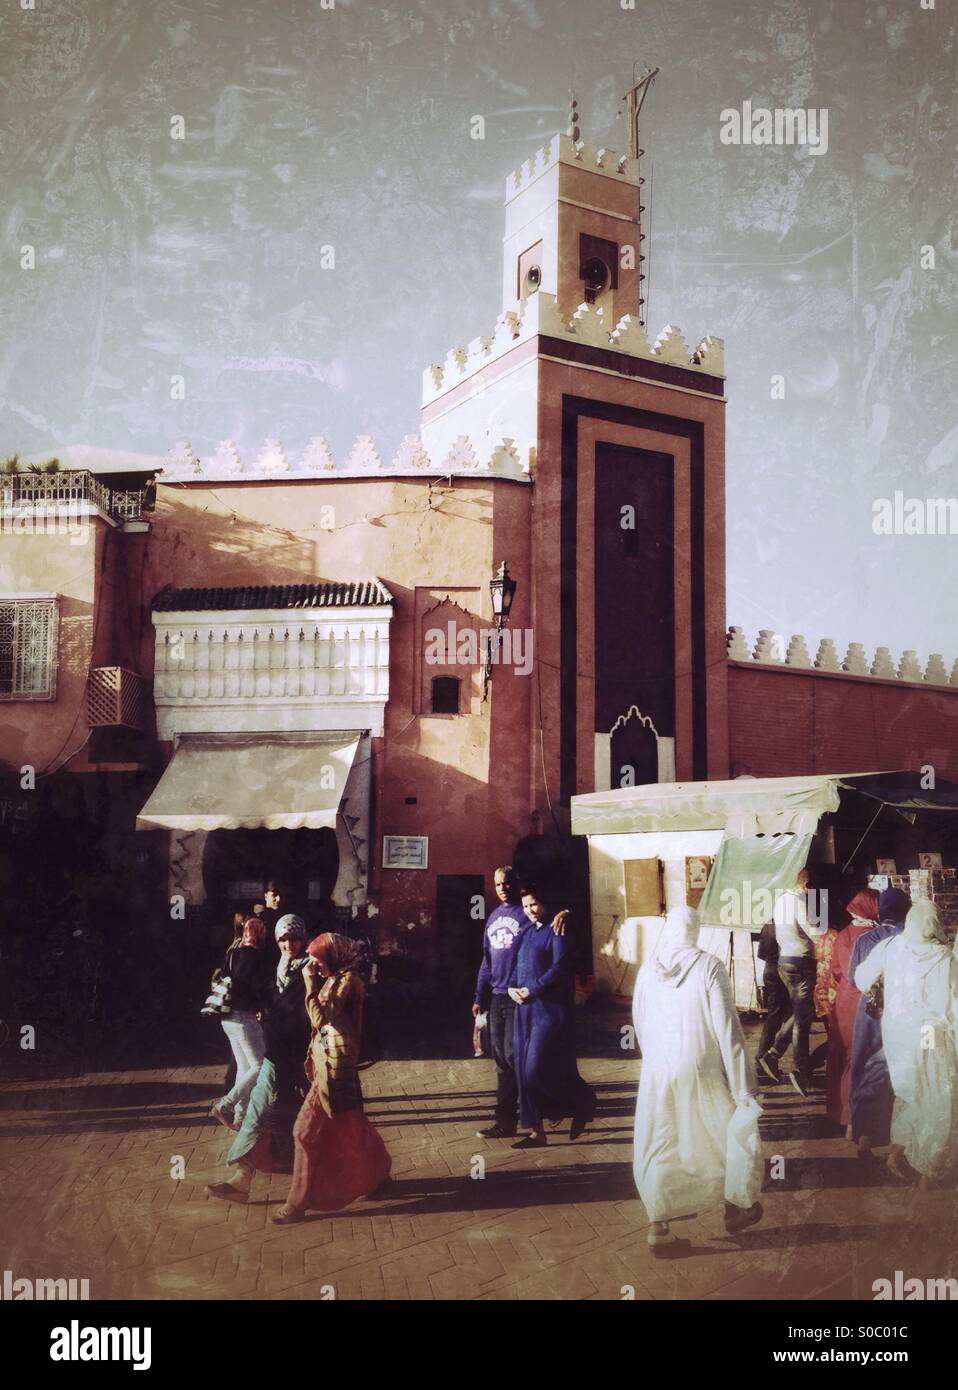 People strolling past a mosque. Jemaa El Fna, Marrakech, Morocco. Stock Photo